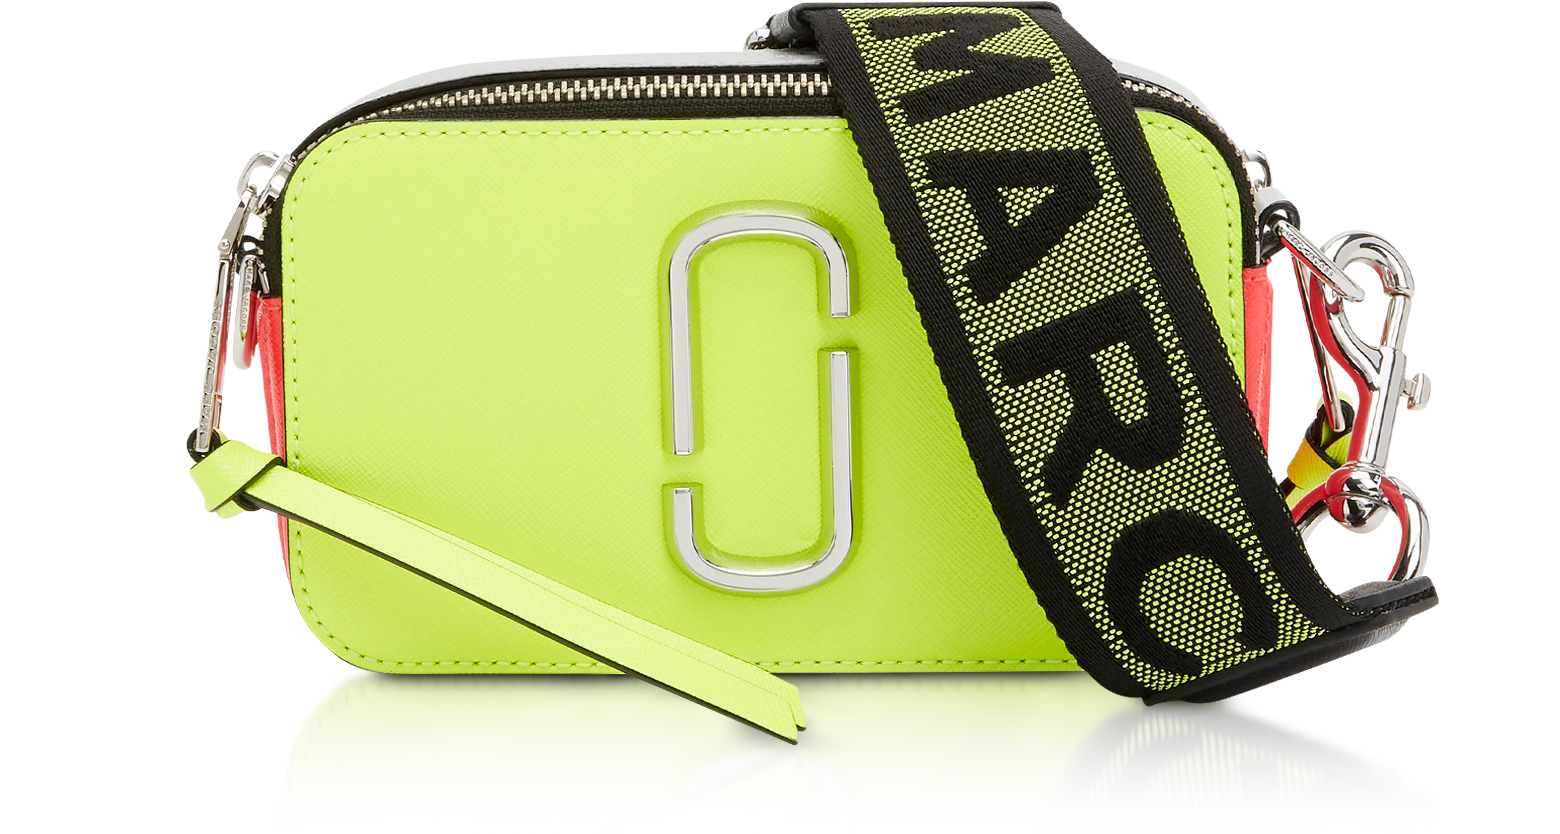 Marc Jacobs Green And Pink Snapshot Bag